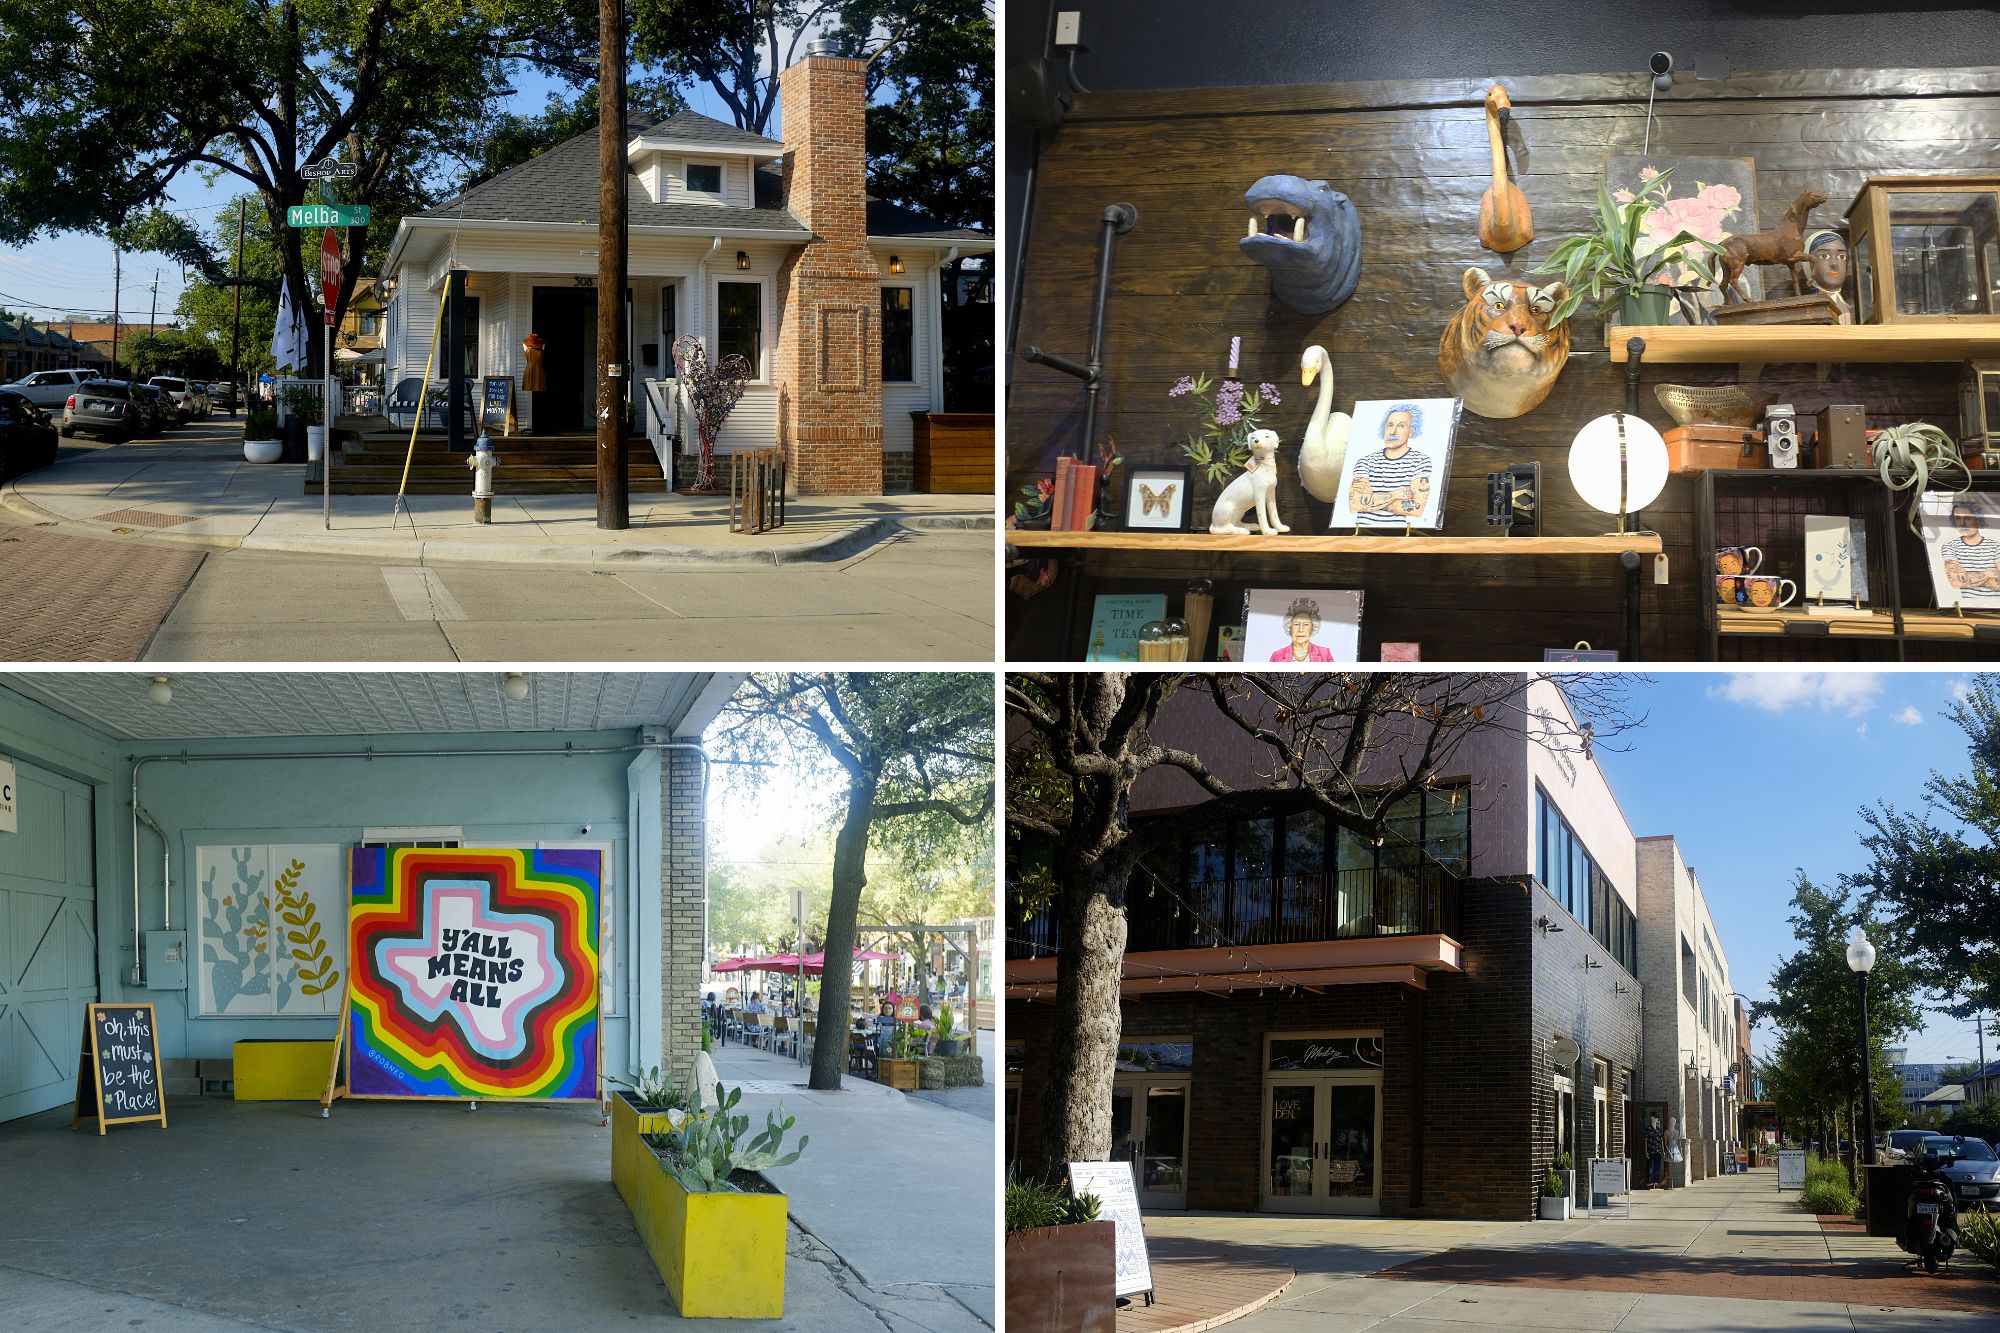 Exterior and interior of shops in the Bishop Arts District